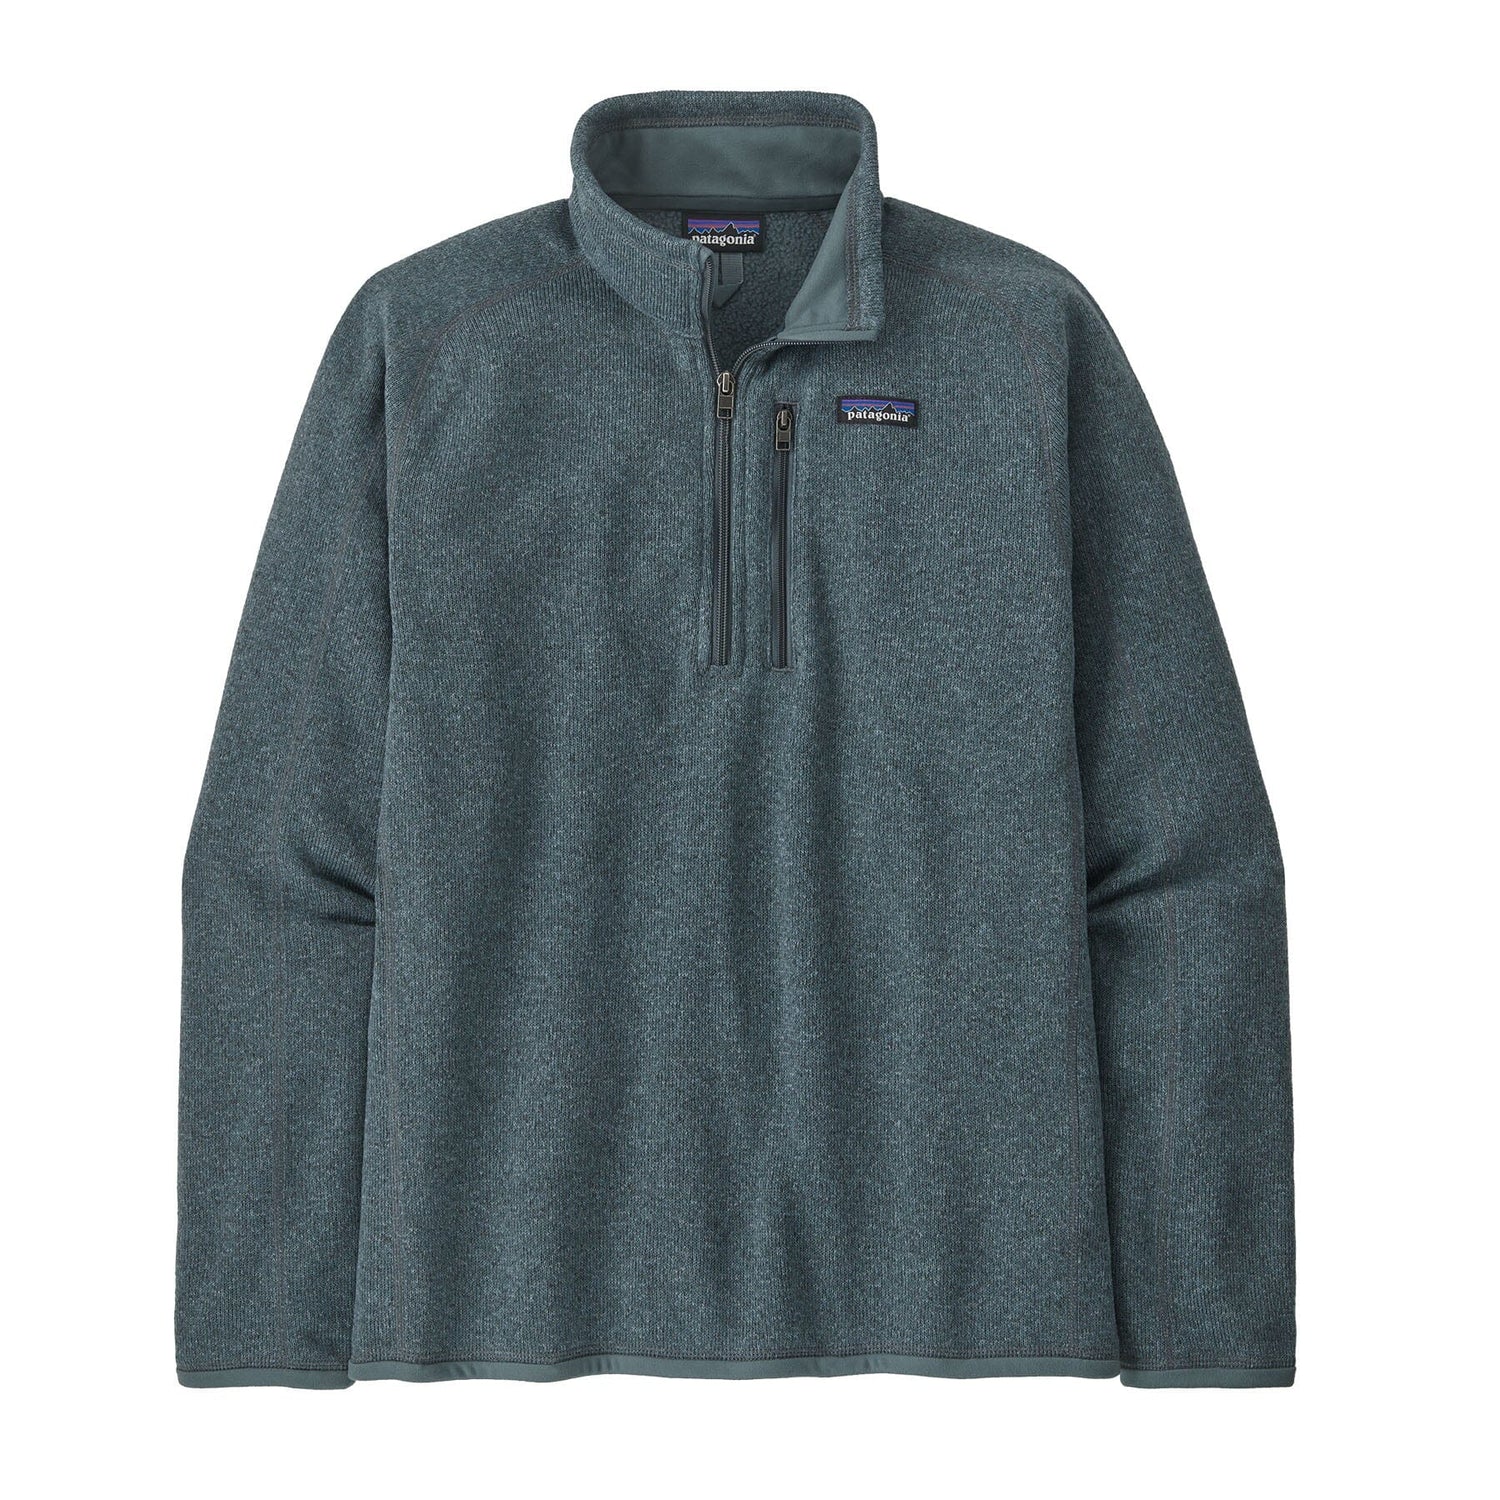 Patagonia M's Better Sweater 1/4 Zip Fleece - 100% Recycled Polyester Nouveau Green Shirt